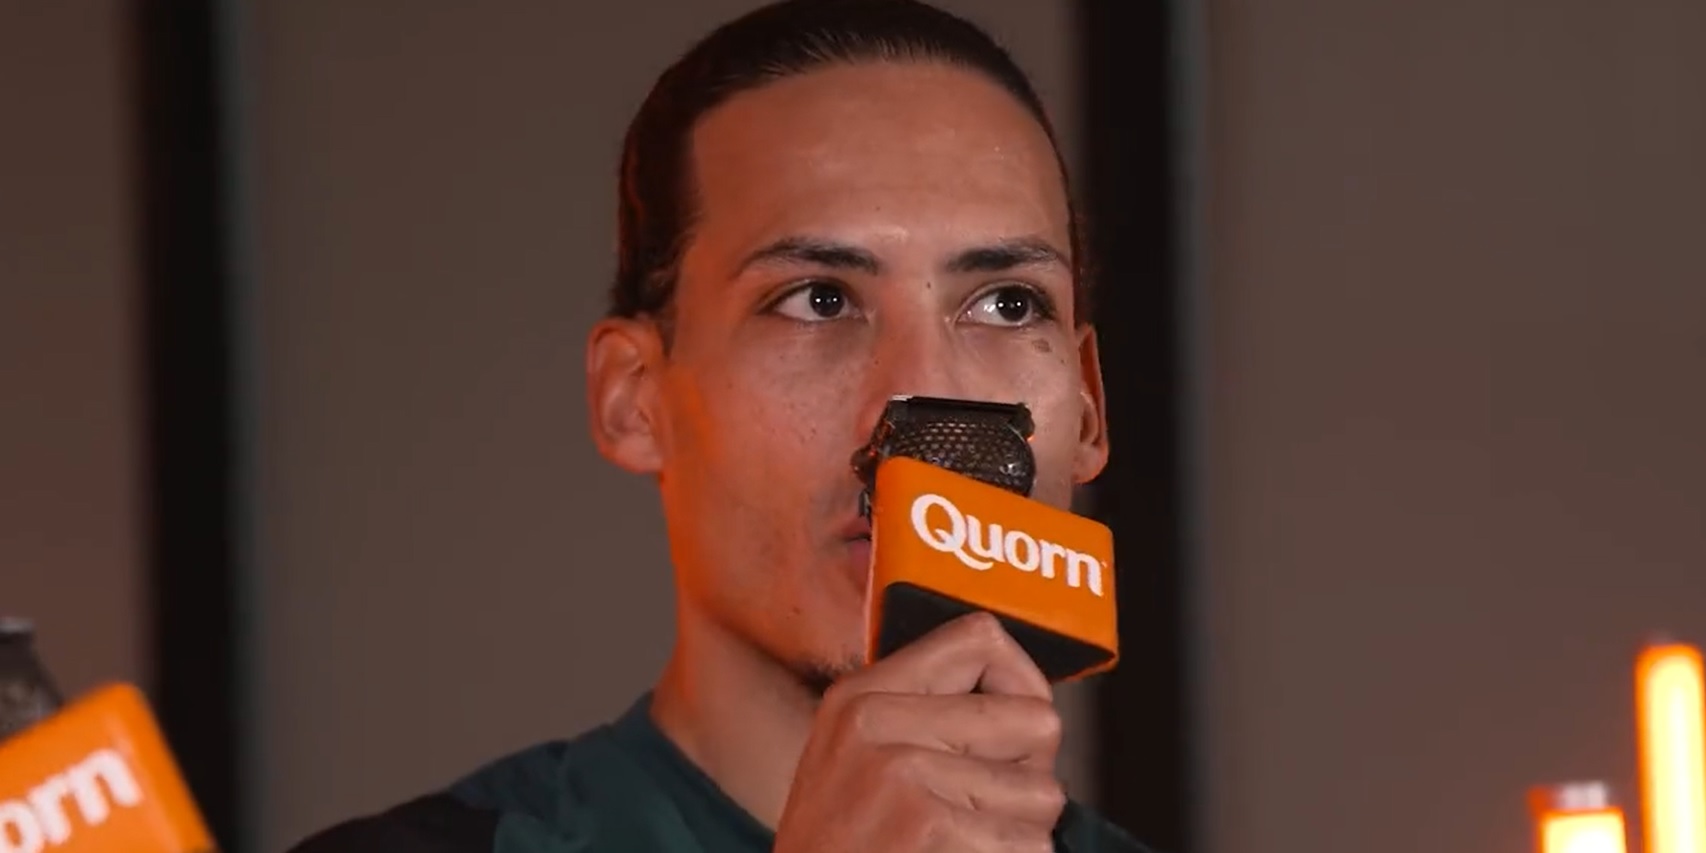 (Video) Van Dijk claims Henderson didn’t get enough credit for moment during 5-0 Old Trafford win